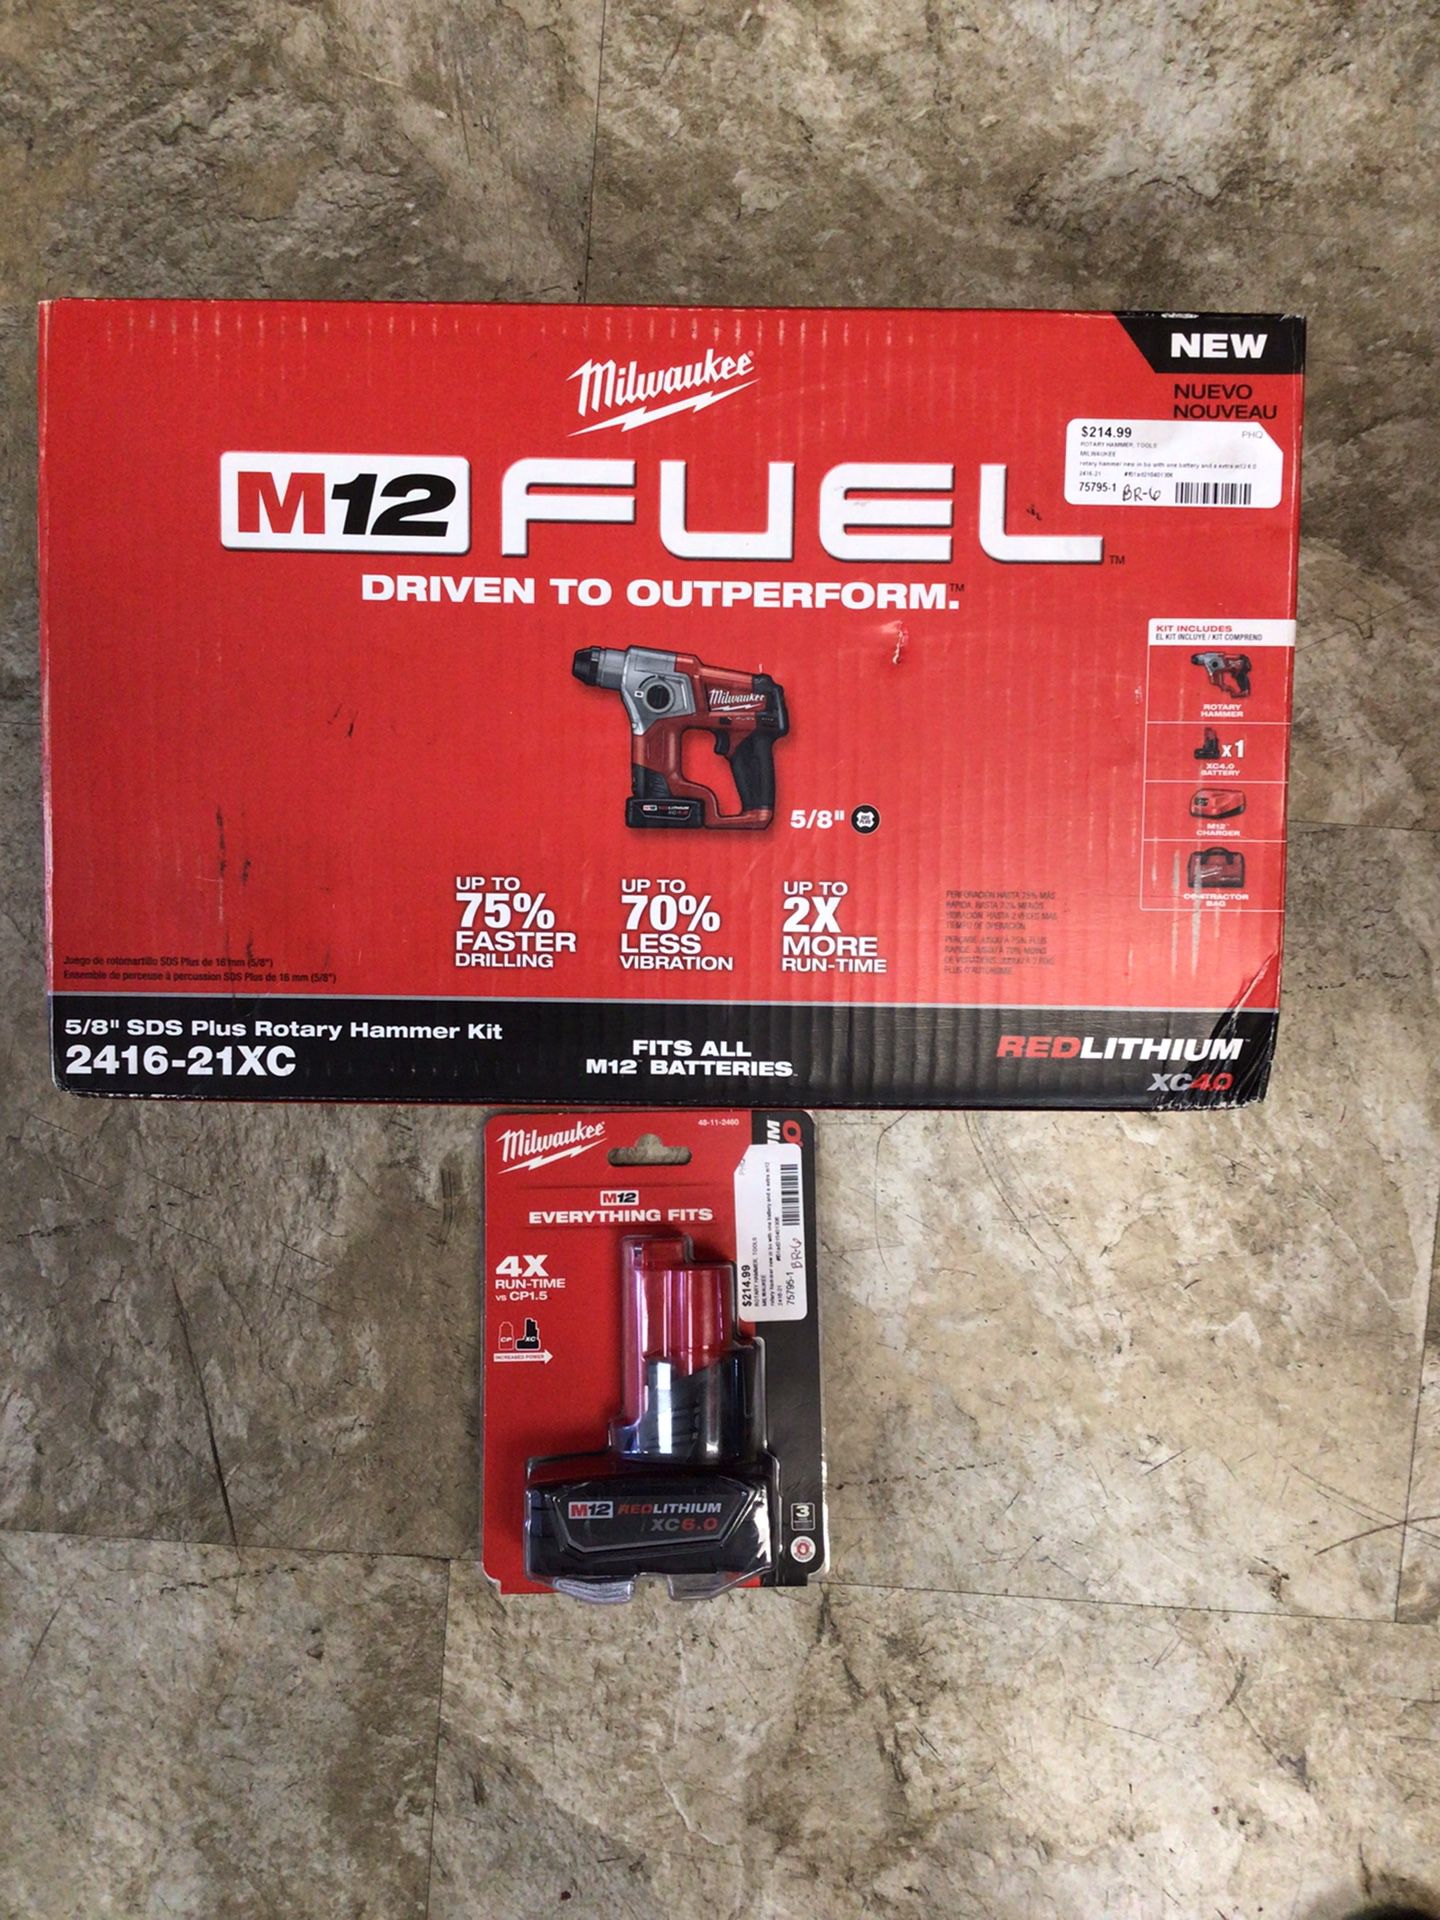 New Milwaukee M12 Fuel SDS Plus Rotary Hammer Kit W/ Extra Battery 